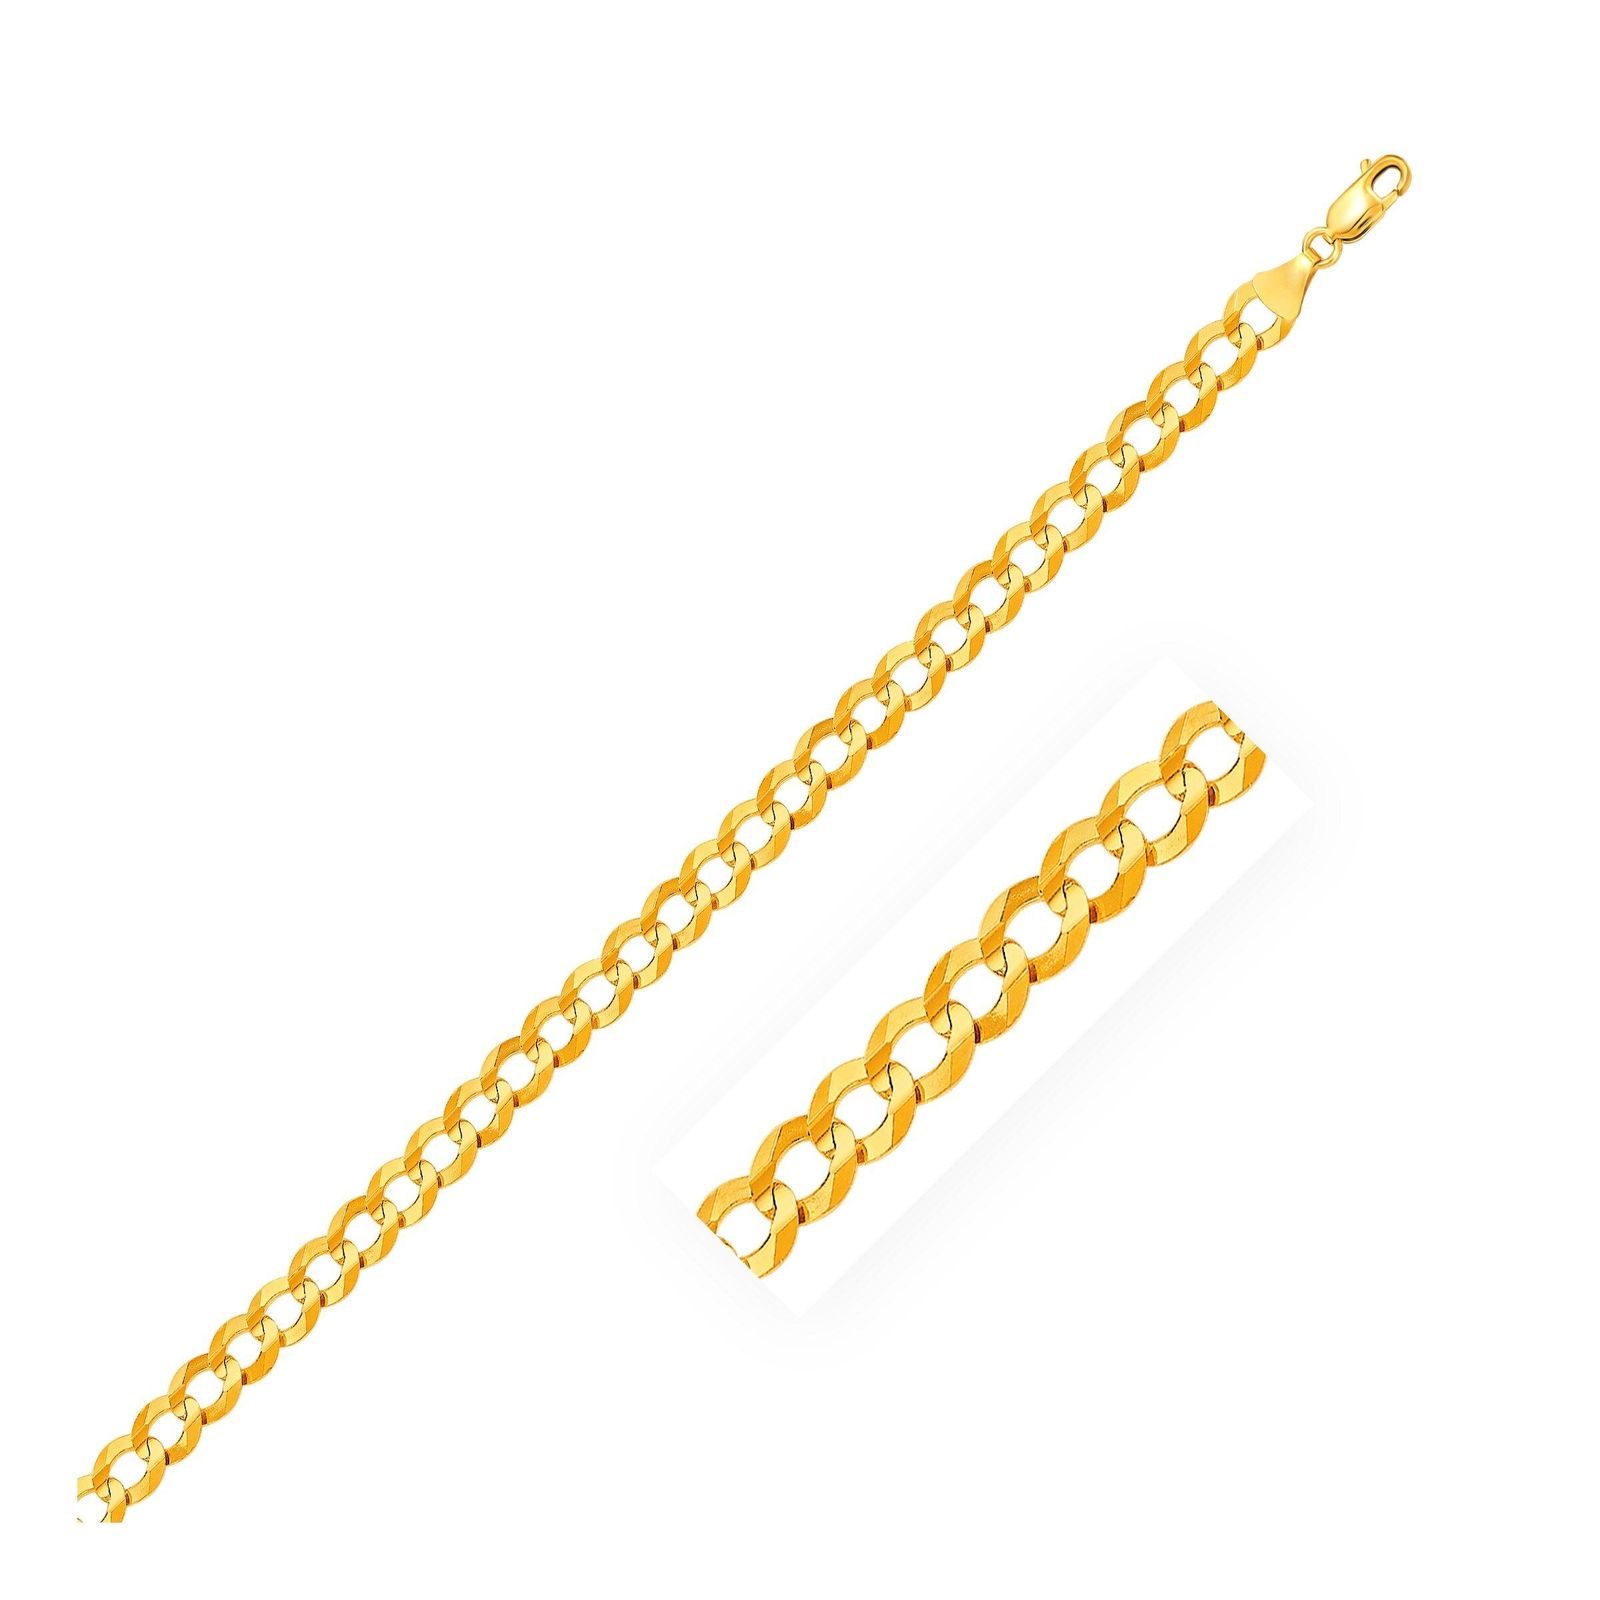 3.2mm 10k Yellow Gold Curb Chain, size 22''